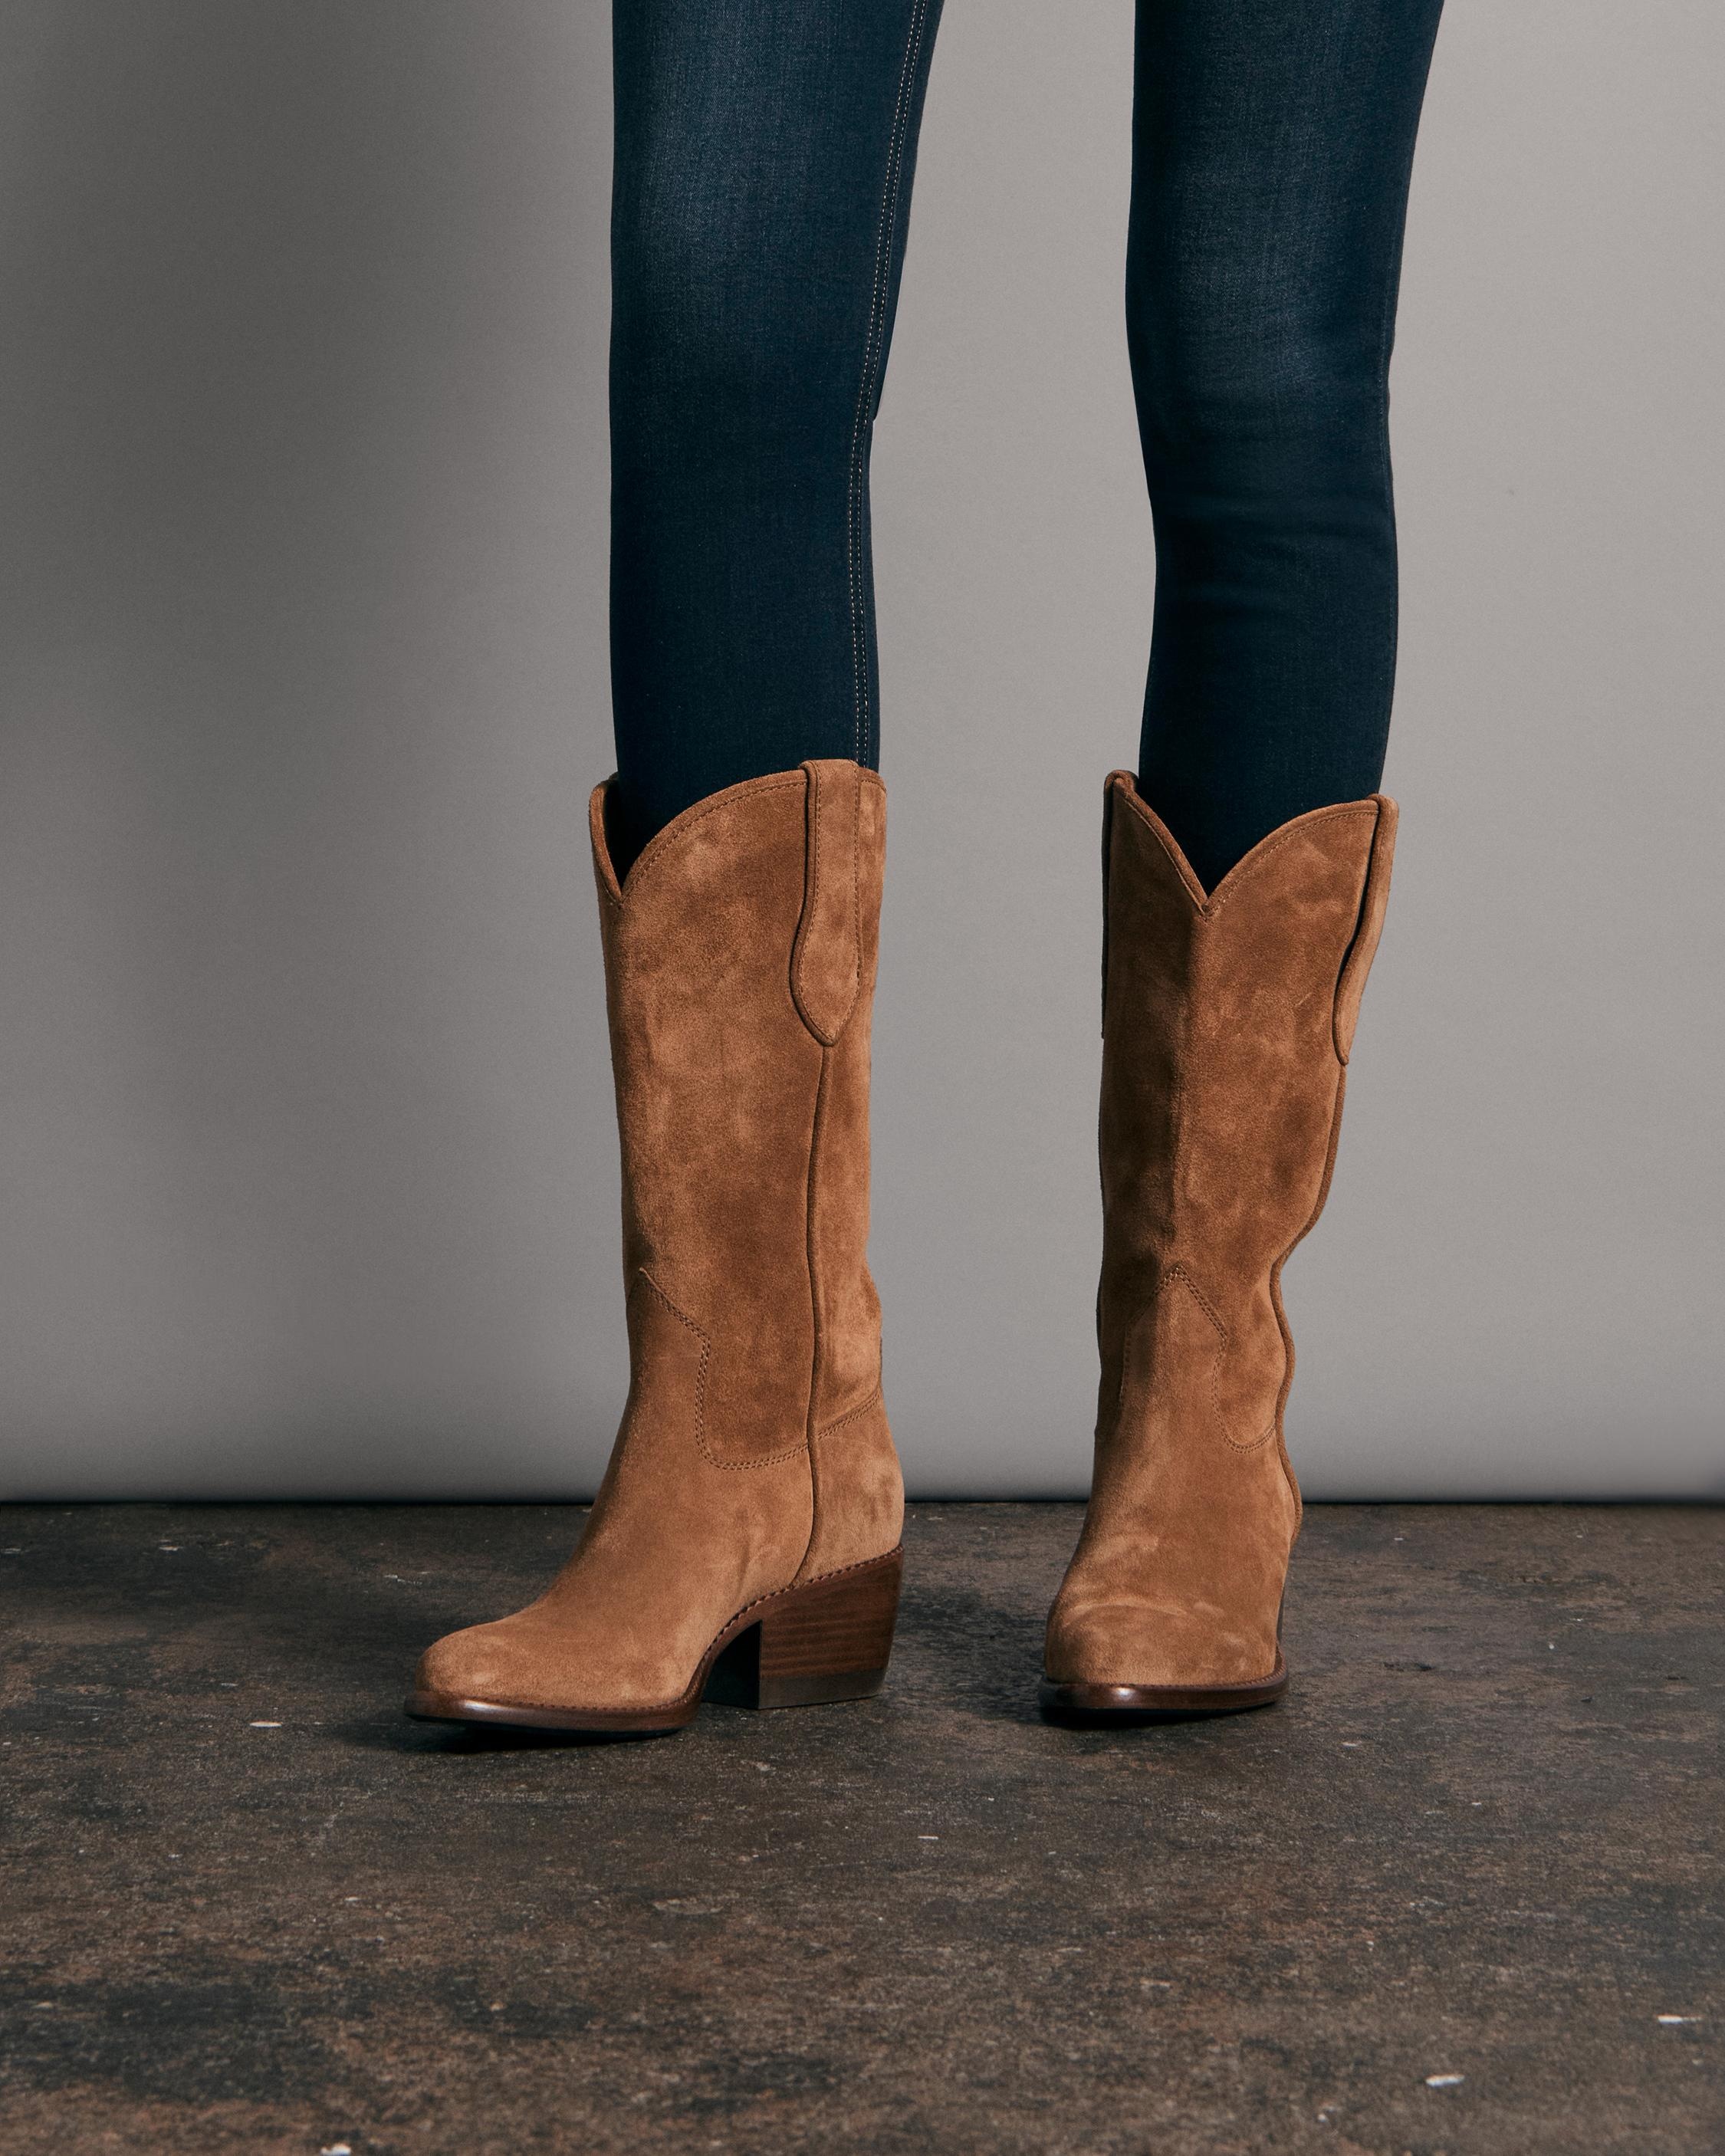 Rb Cowboy Boot - Suede
Heeled Boot - 2